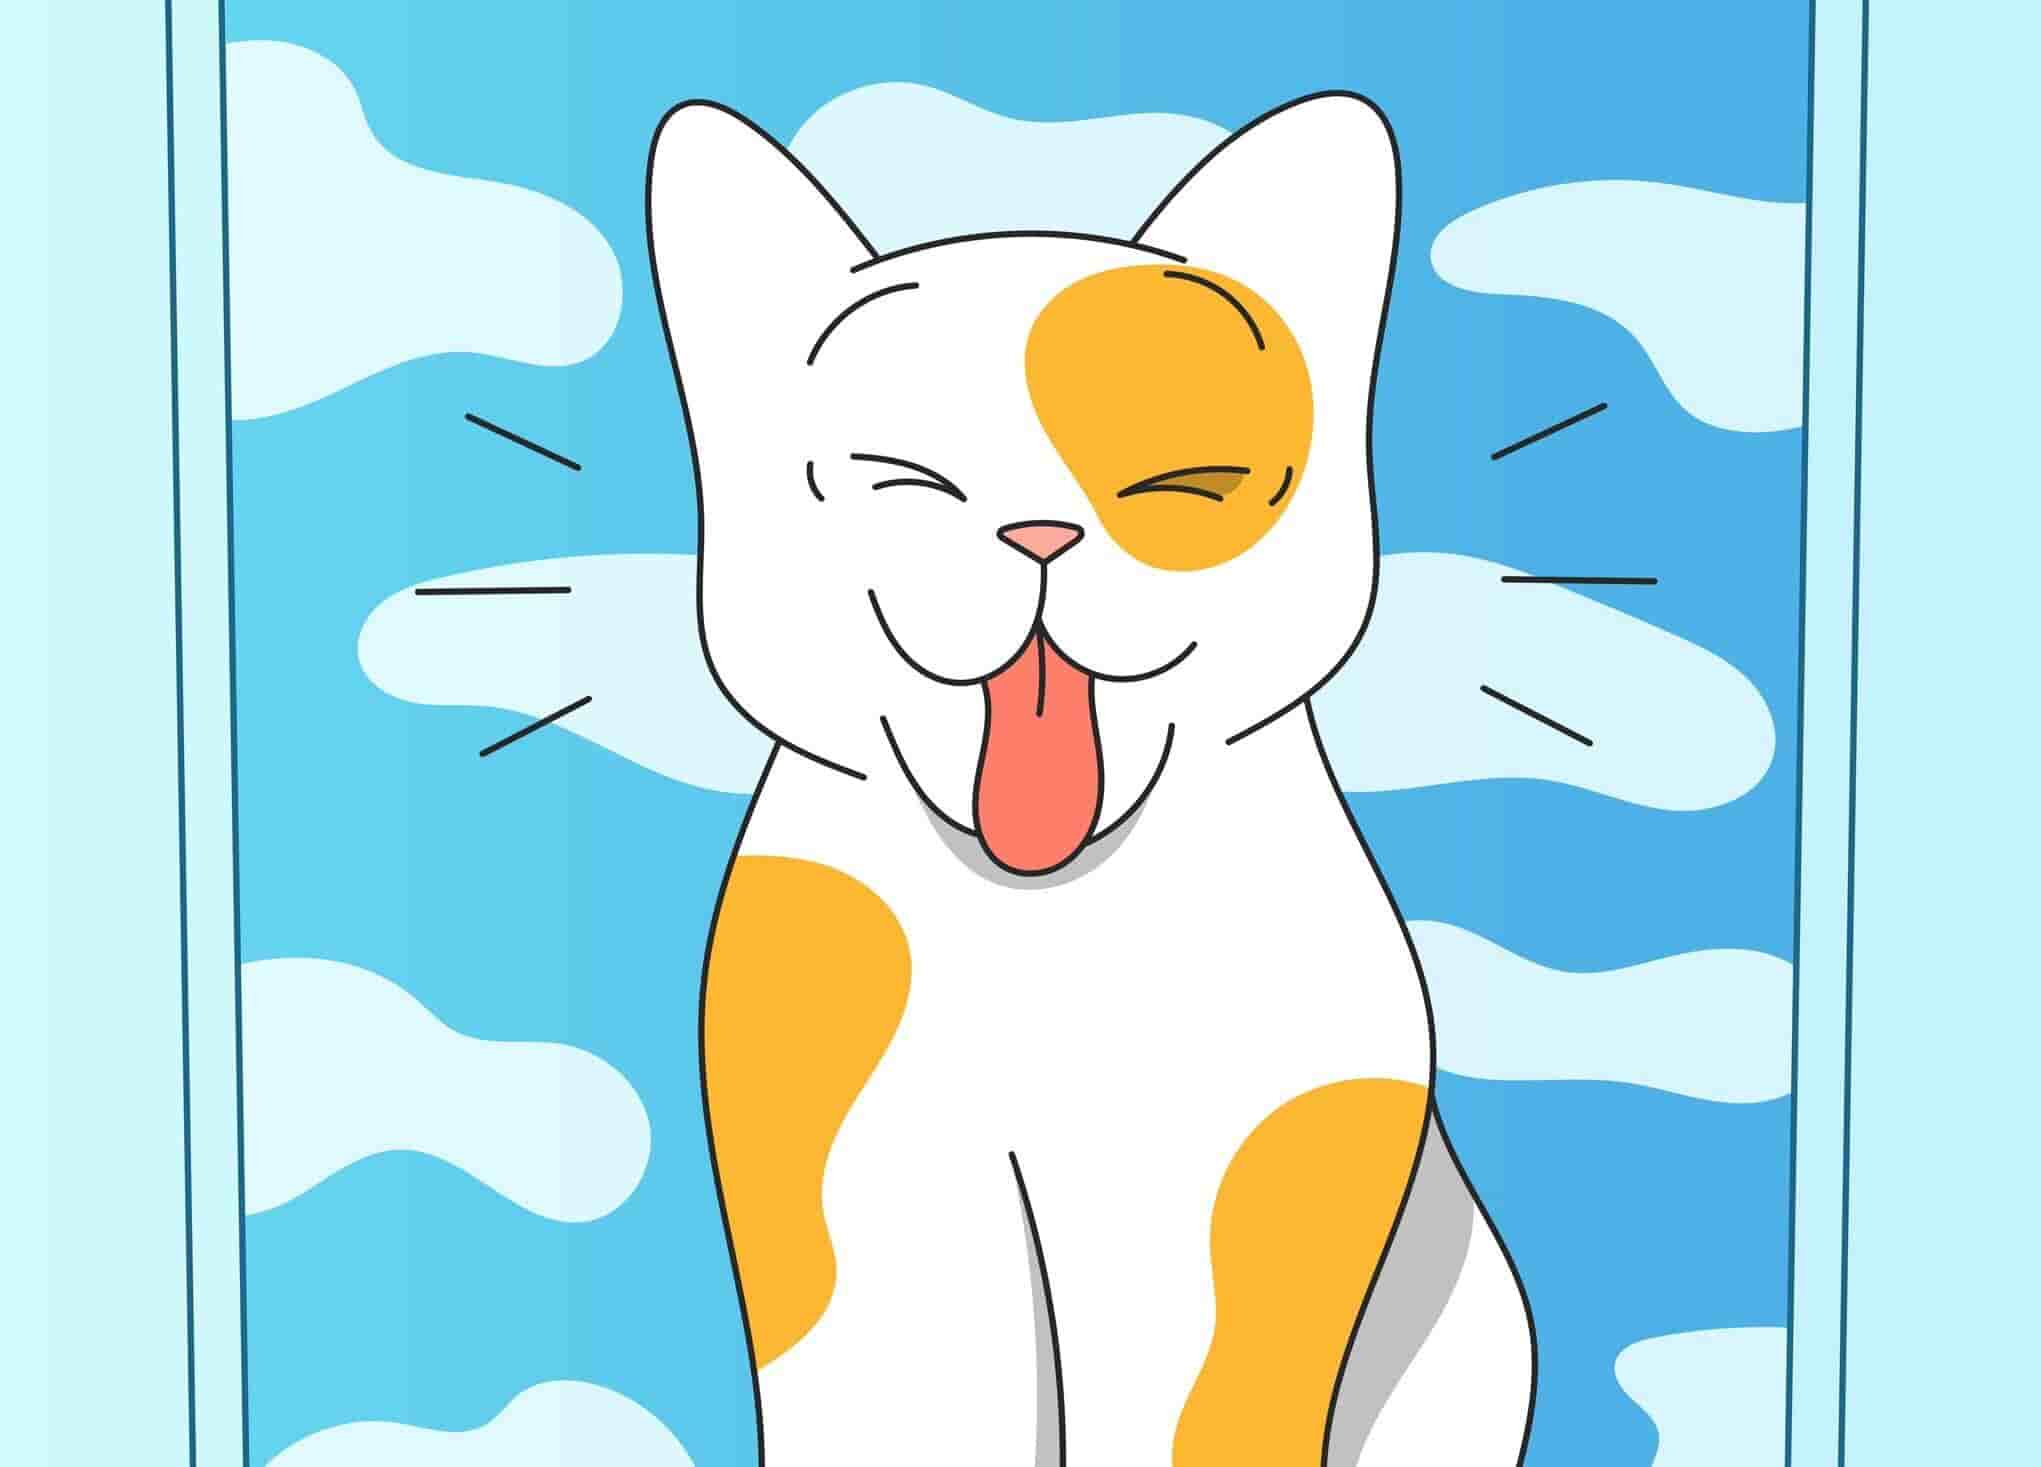 Can Cats Get Hiccups?